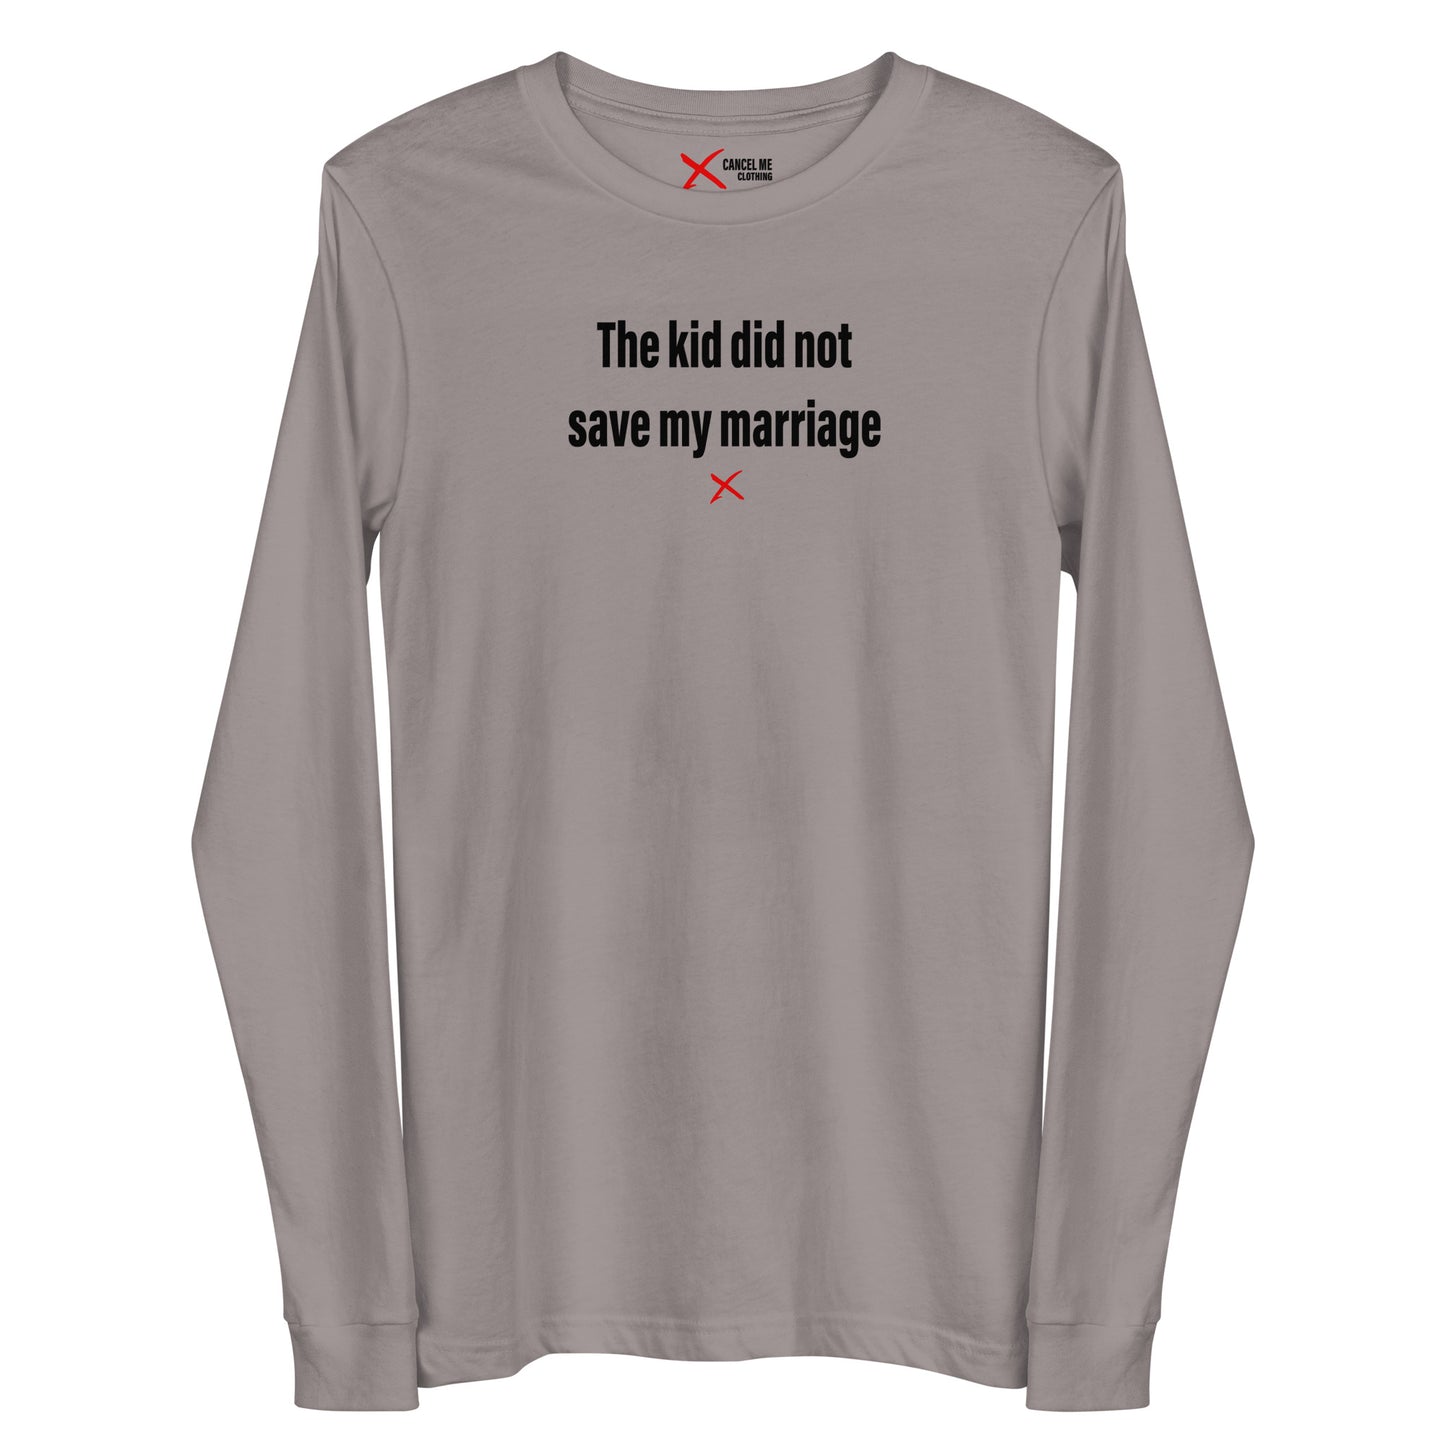 The kid did not save my marriage - Longsleeve